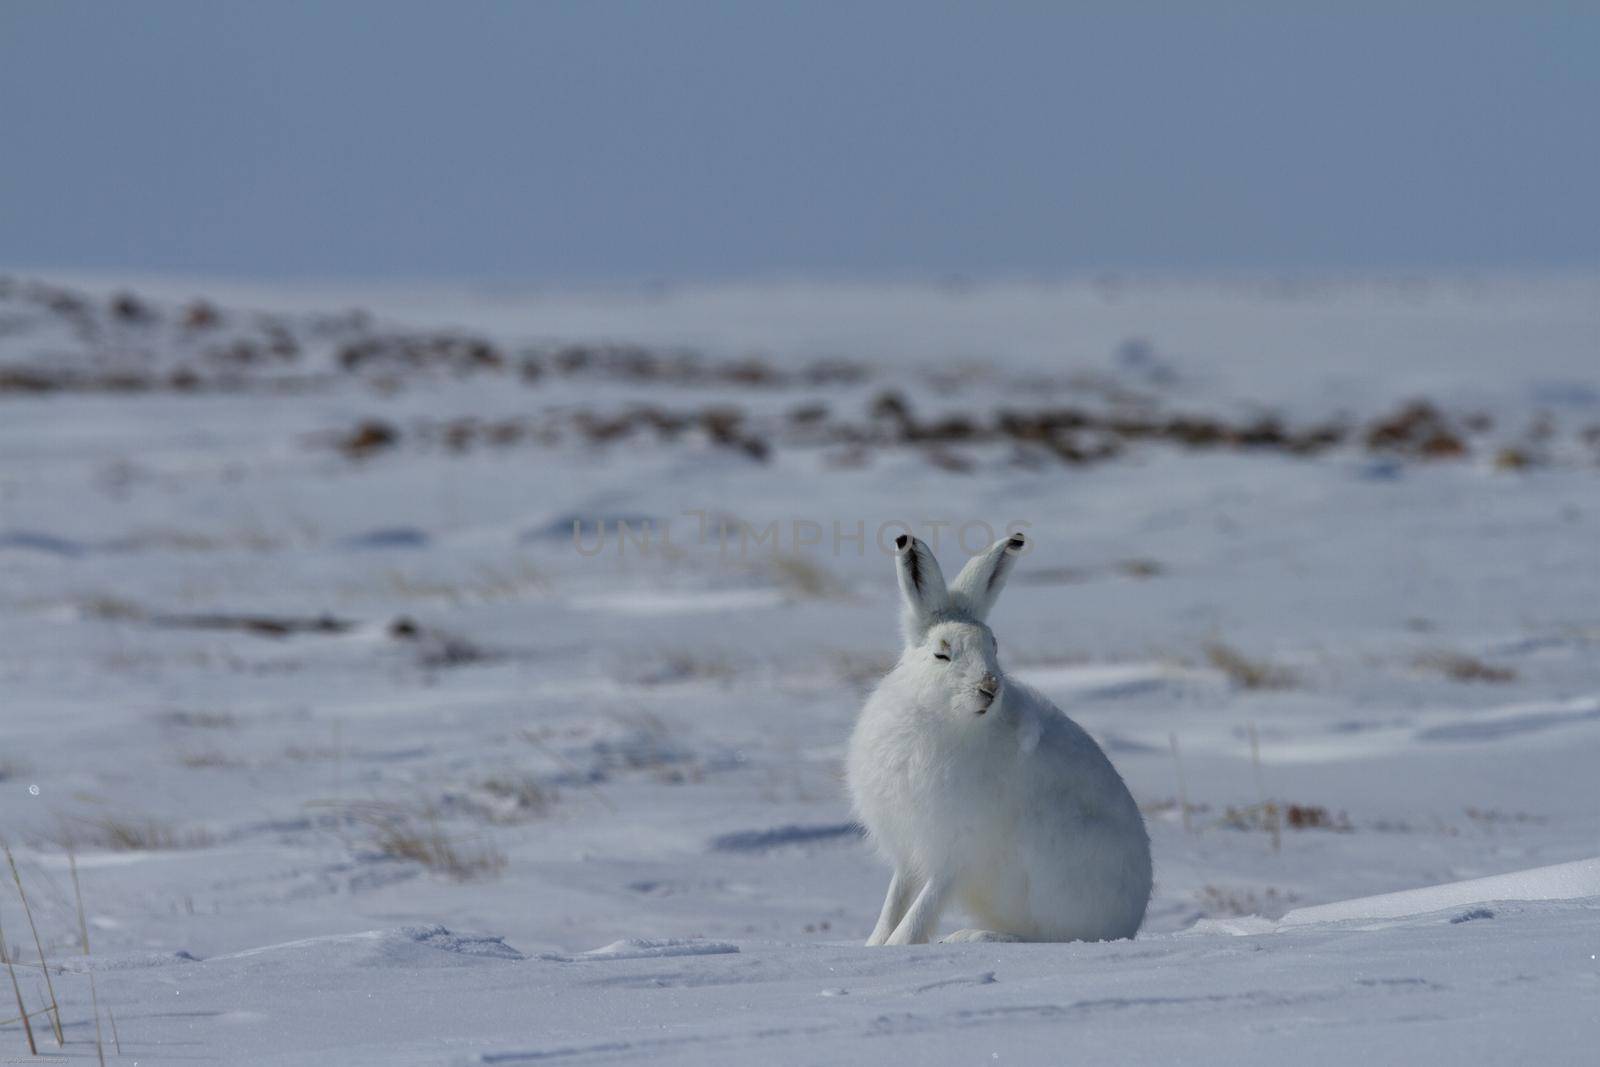 Arctic hare, Lepus arcticus, sitting on snow with ears pointing up and staring straight at the camera, Nunavut Canada